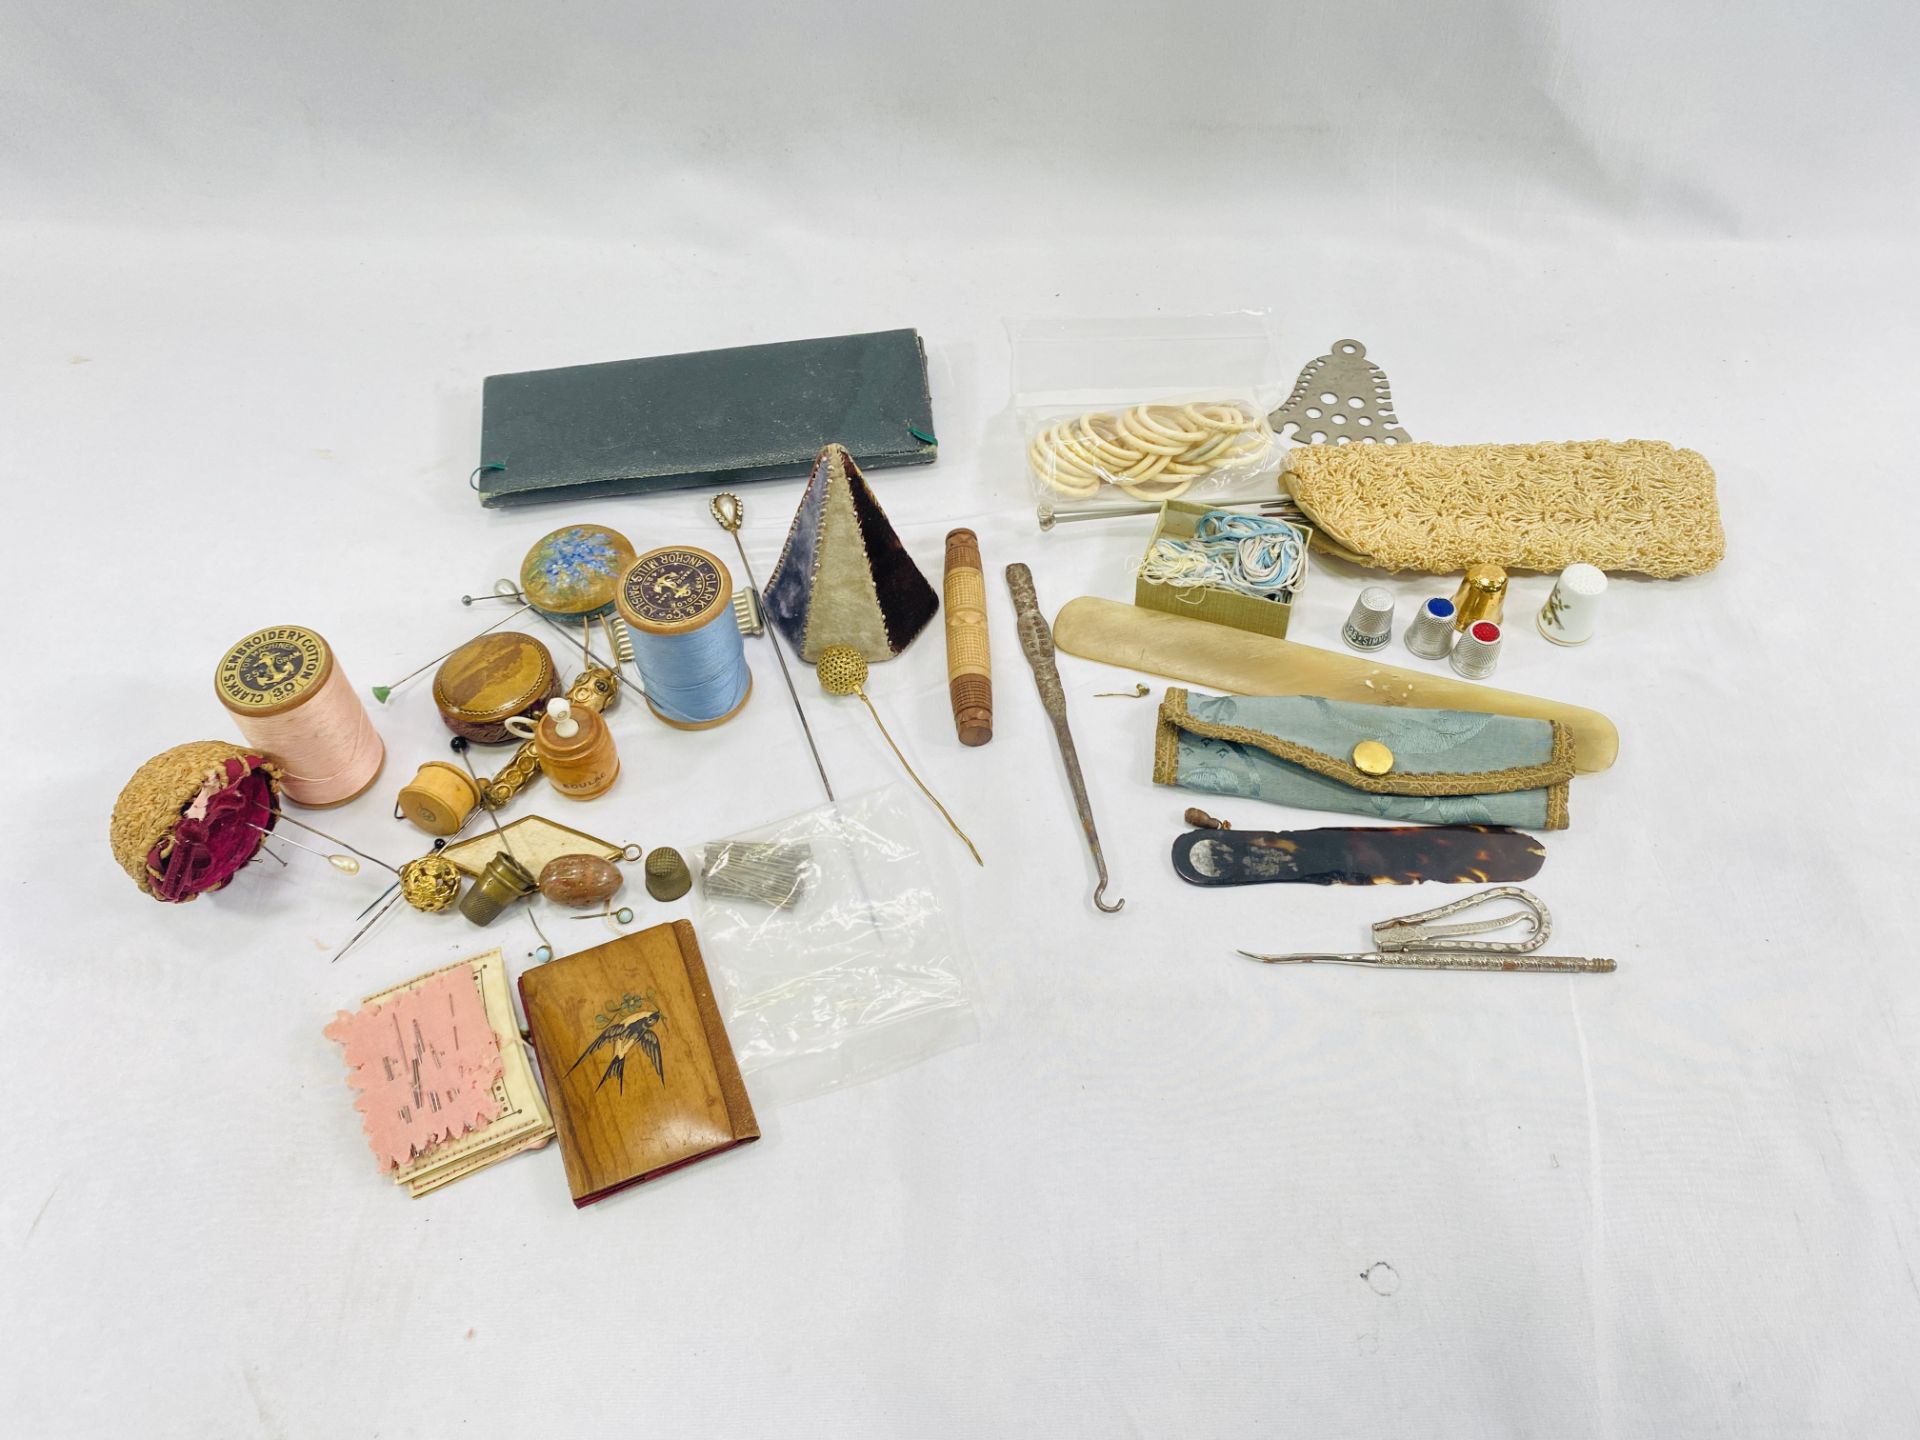 A collection of pin cushions and tape measures